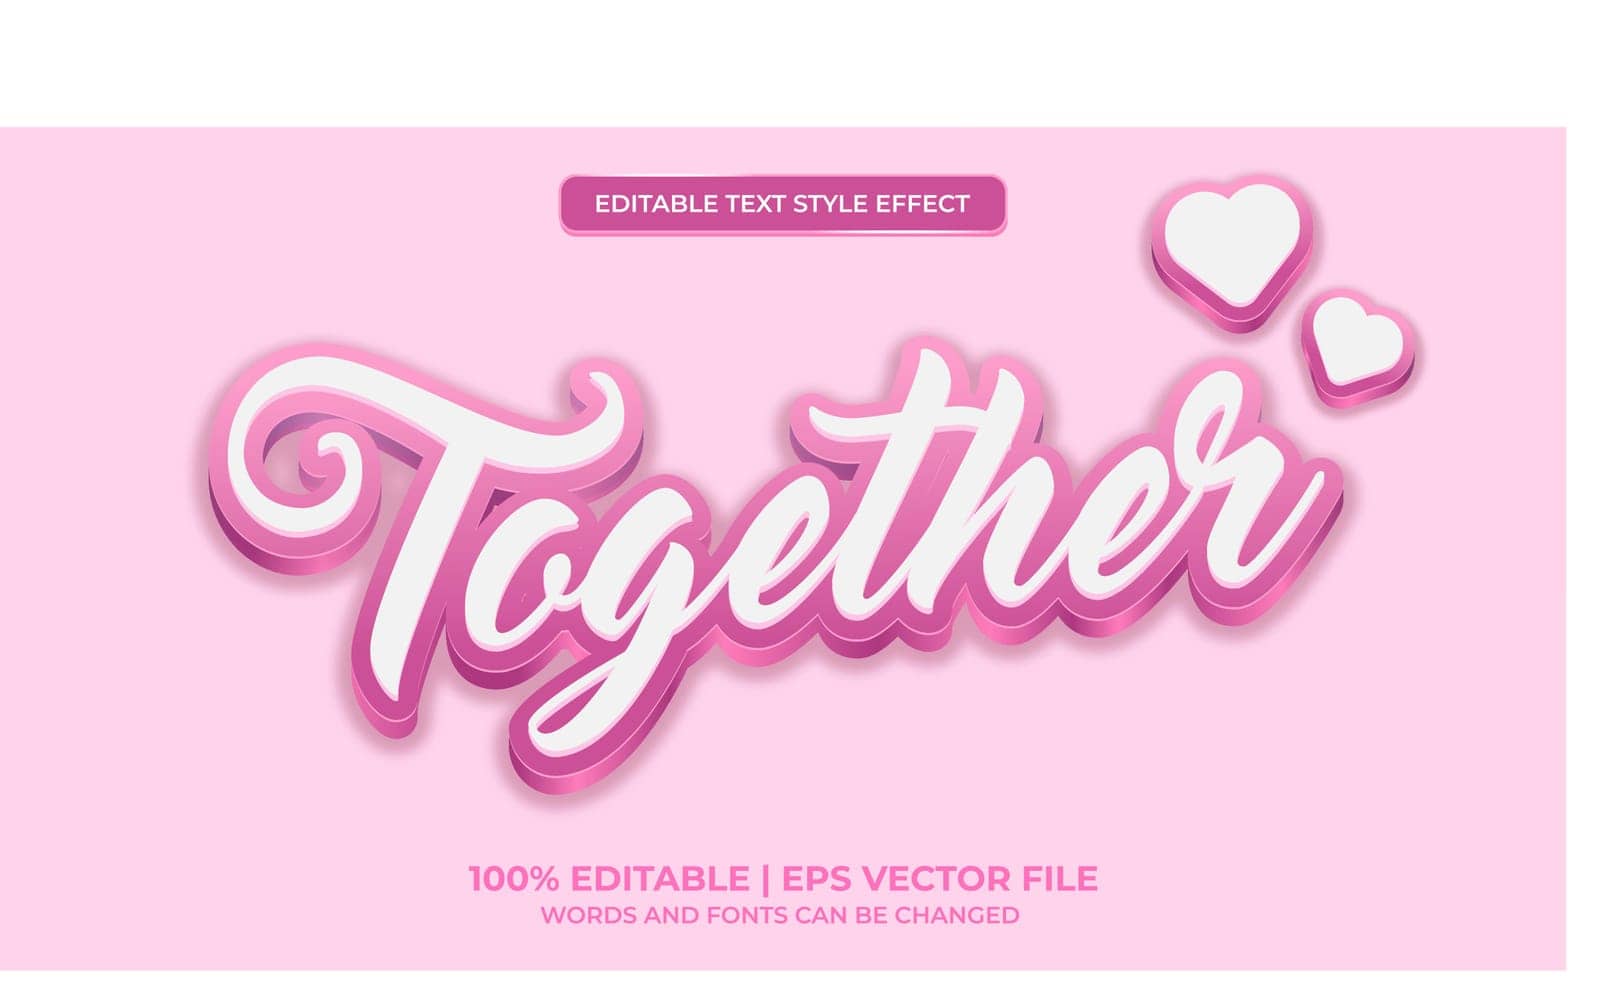 Editable text style effect - love text style by Aozora